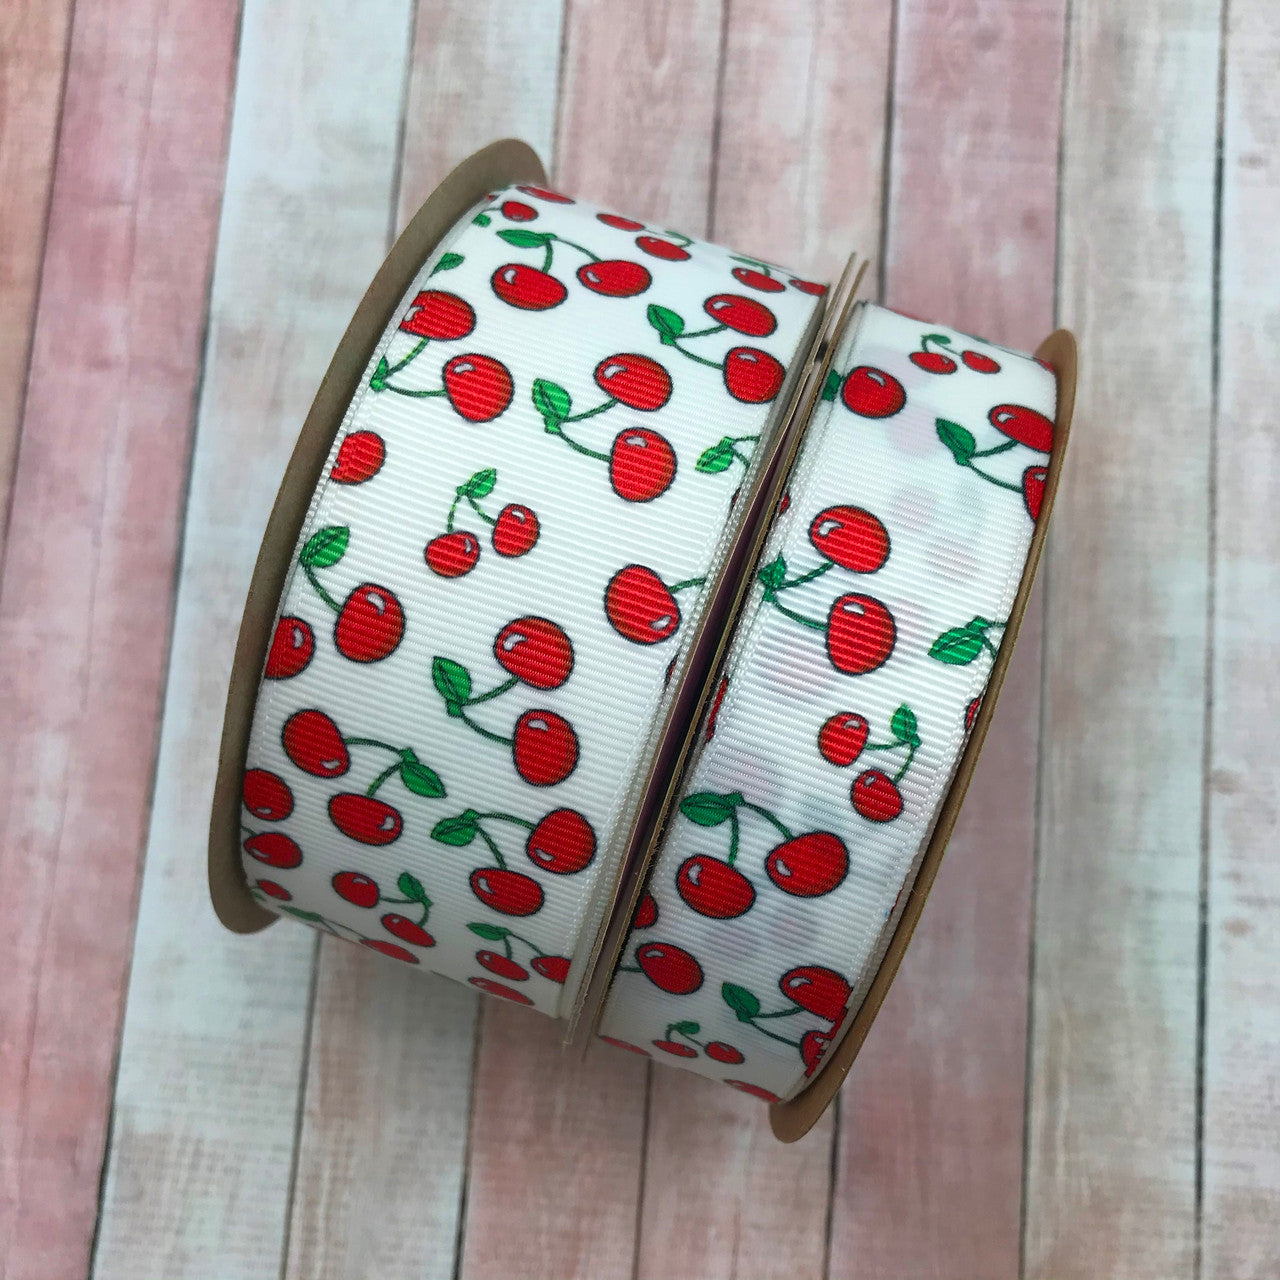 Our cherries ribbon comes in two widths on white grosgrain. We have 1.5" and 7/8" for projects large and small